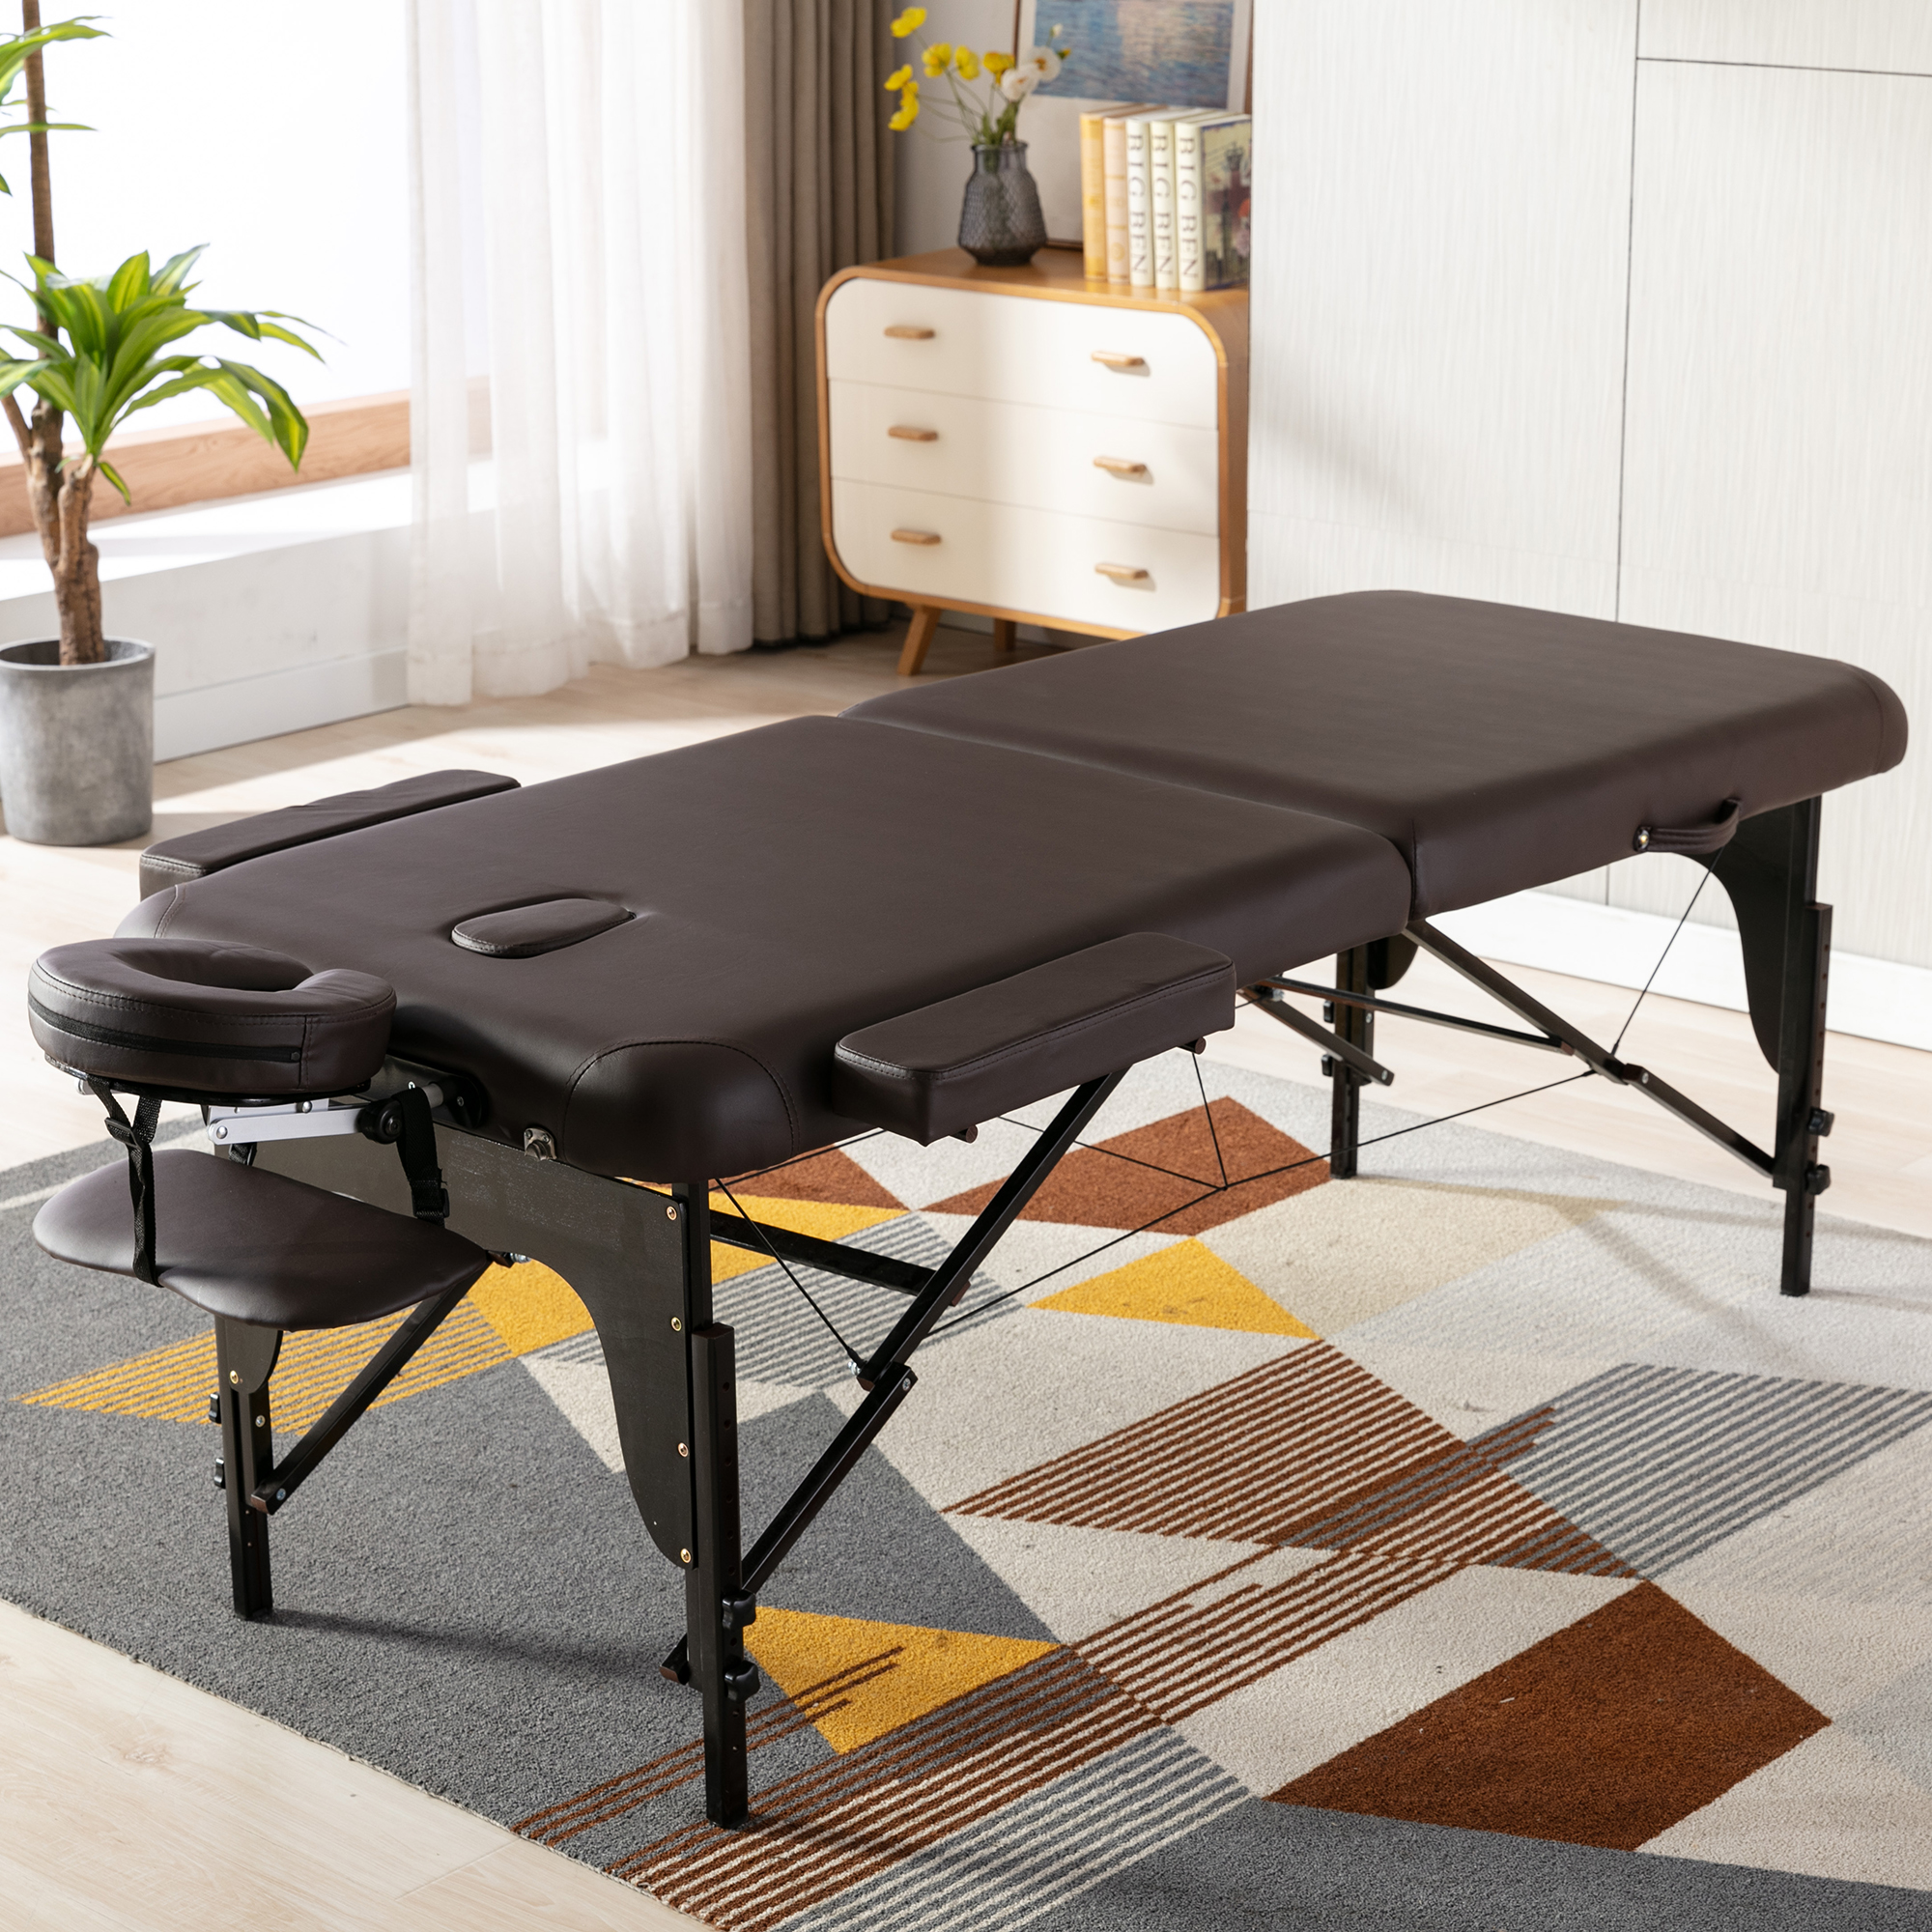 HengMing  Portable Massage table 29 Inchs Wide PU  leather，2 Section Wooden Adjustable Folding Massage Bed With Carrying Case-CASAINC